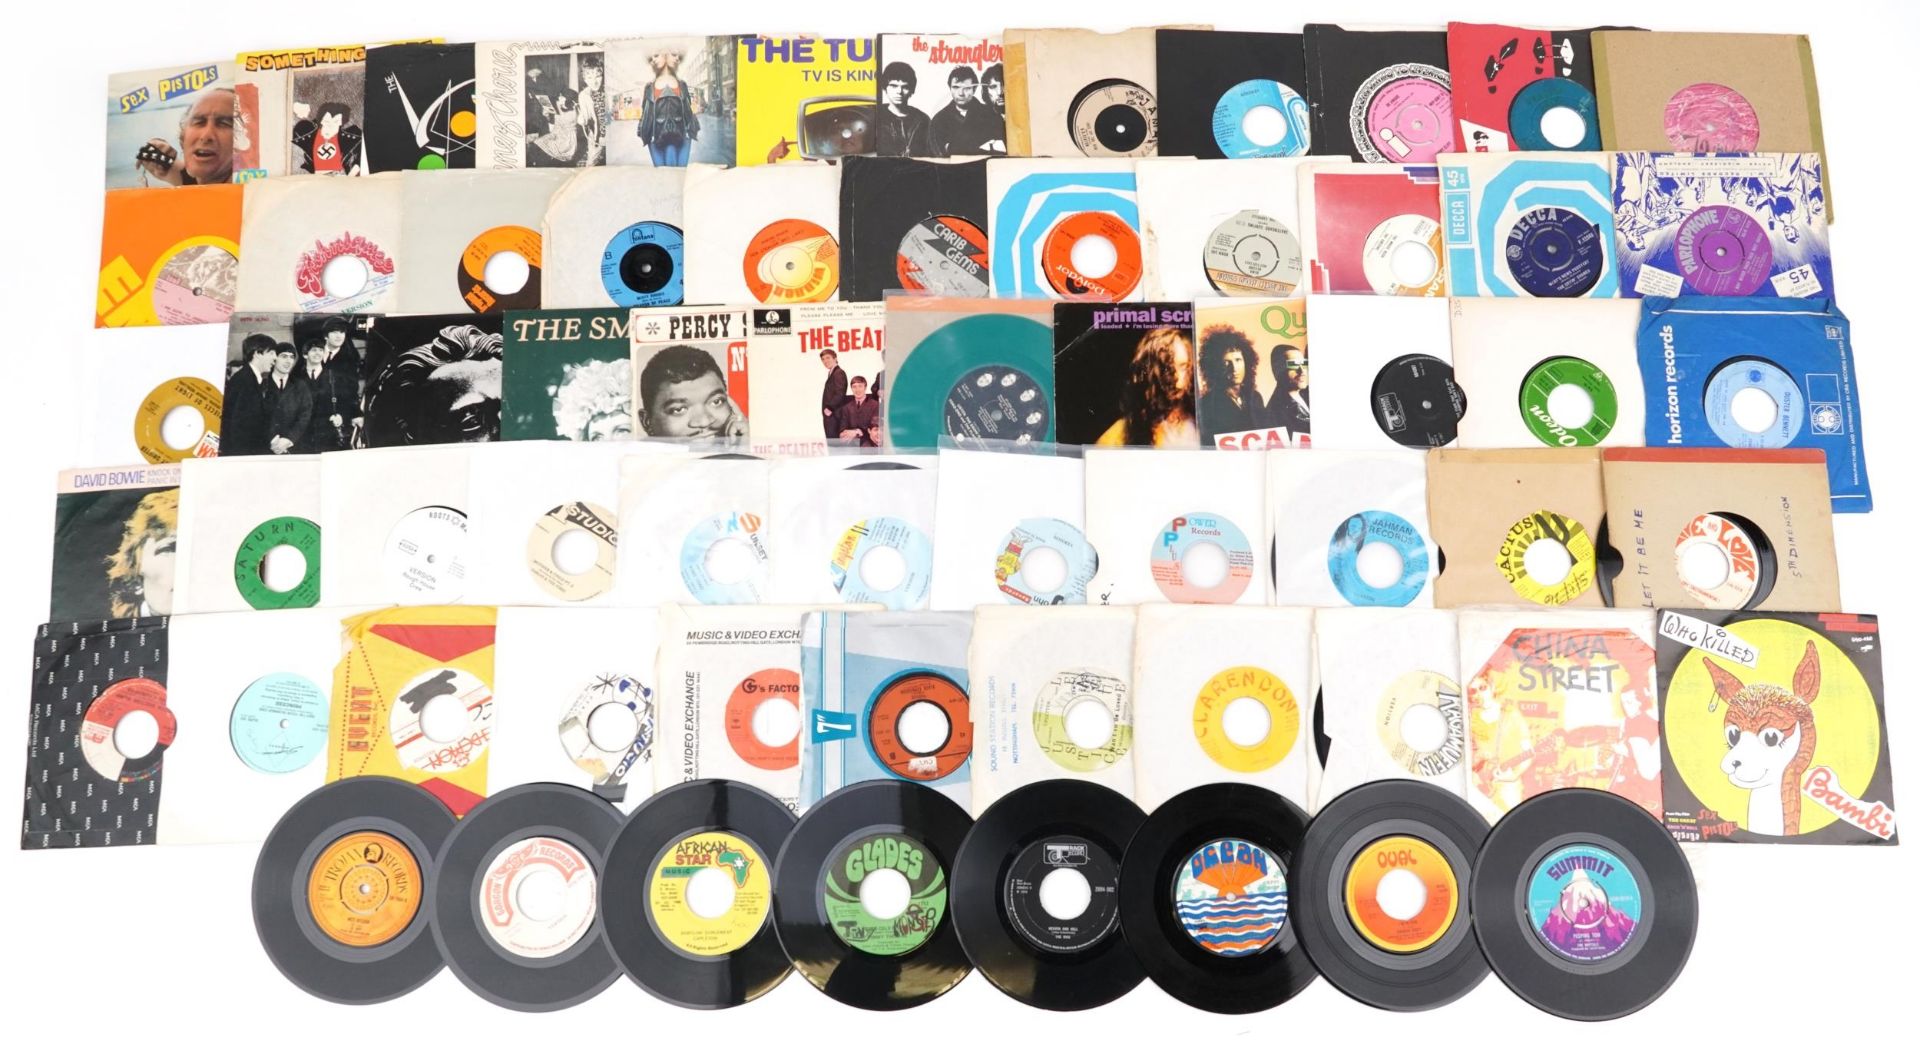 45rpm records including Scandal, The Beatles and David Bowie